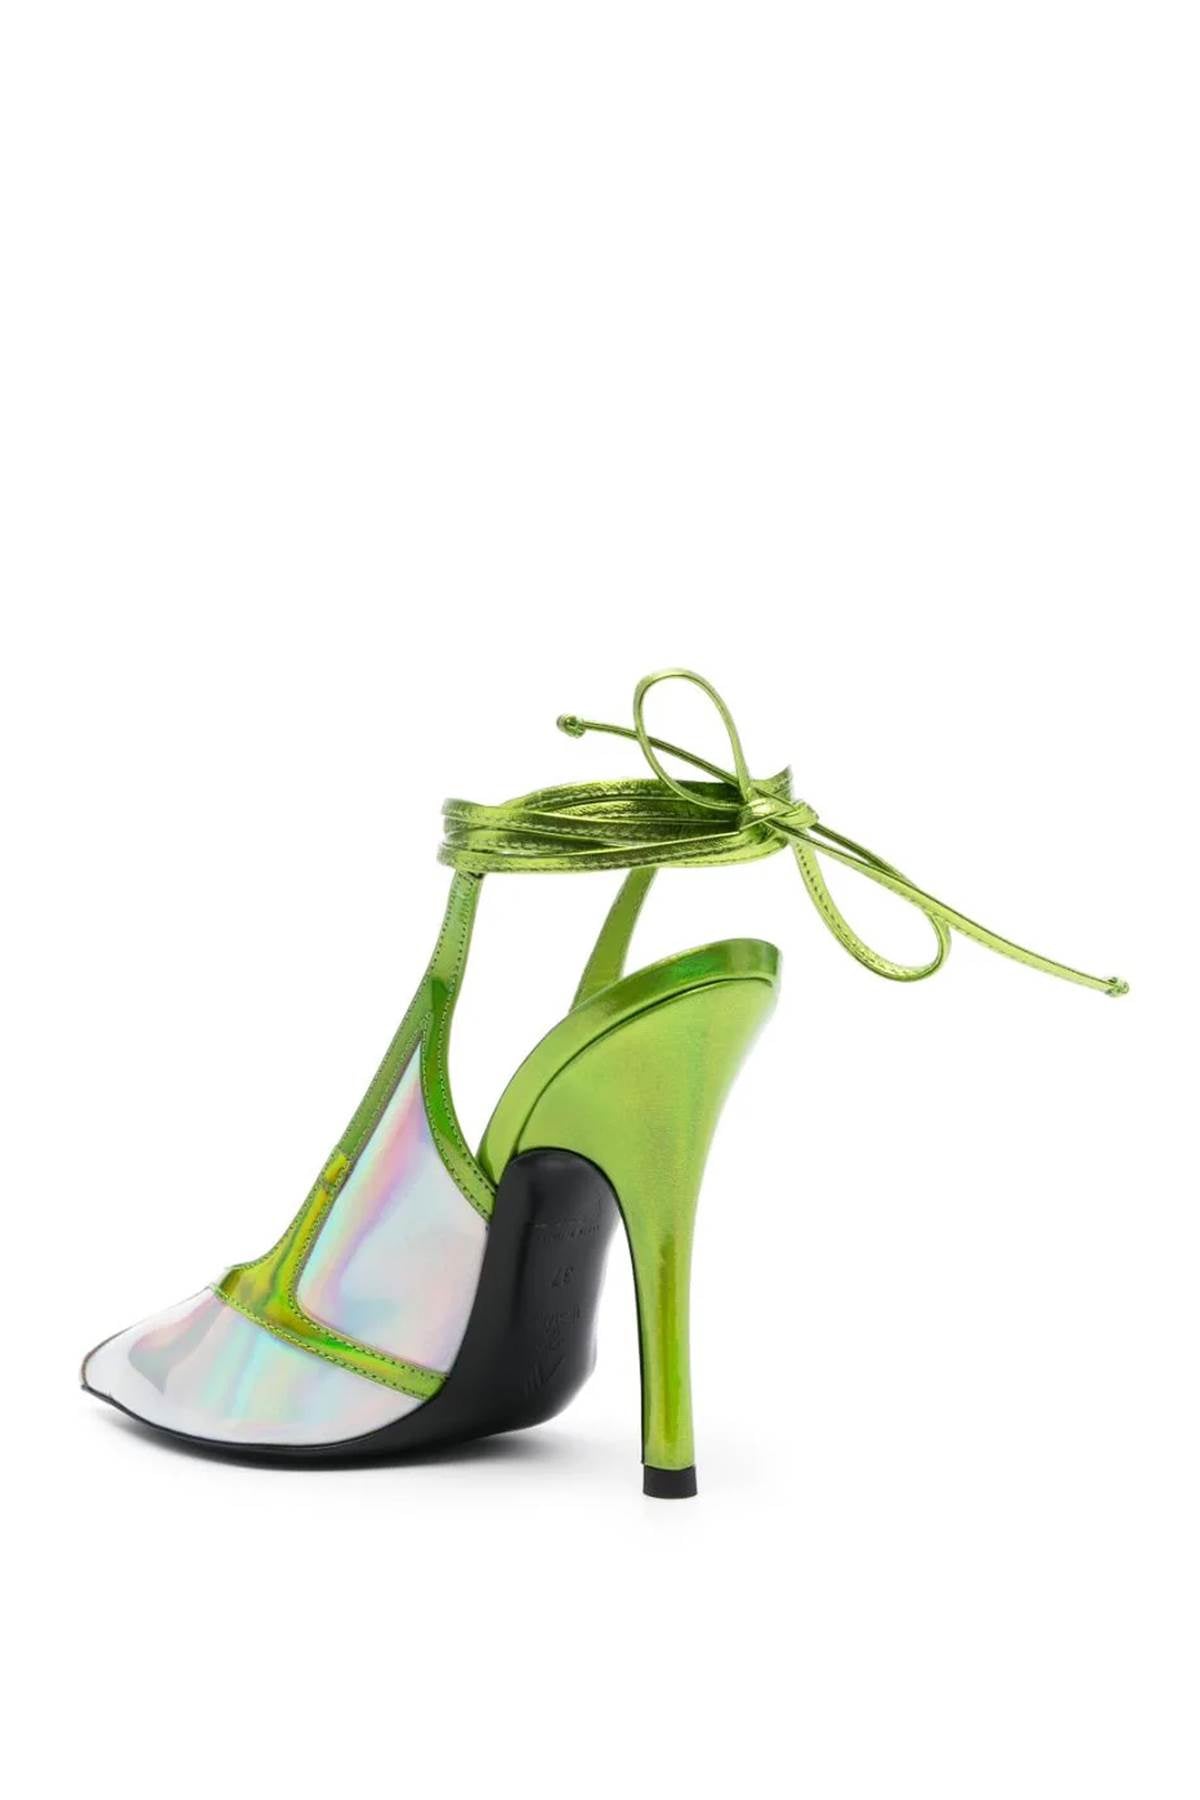 THE ATTICO Venus Chrome Slingback Pumps for Women in Mixed Colours for FW23